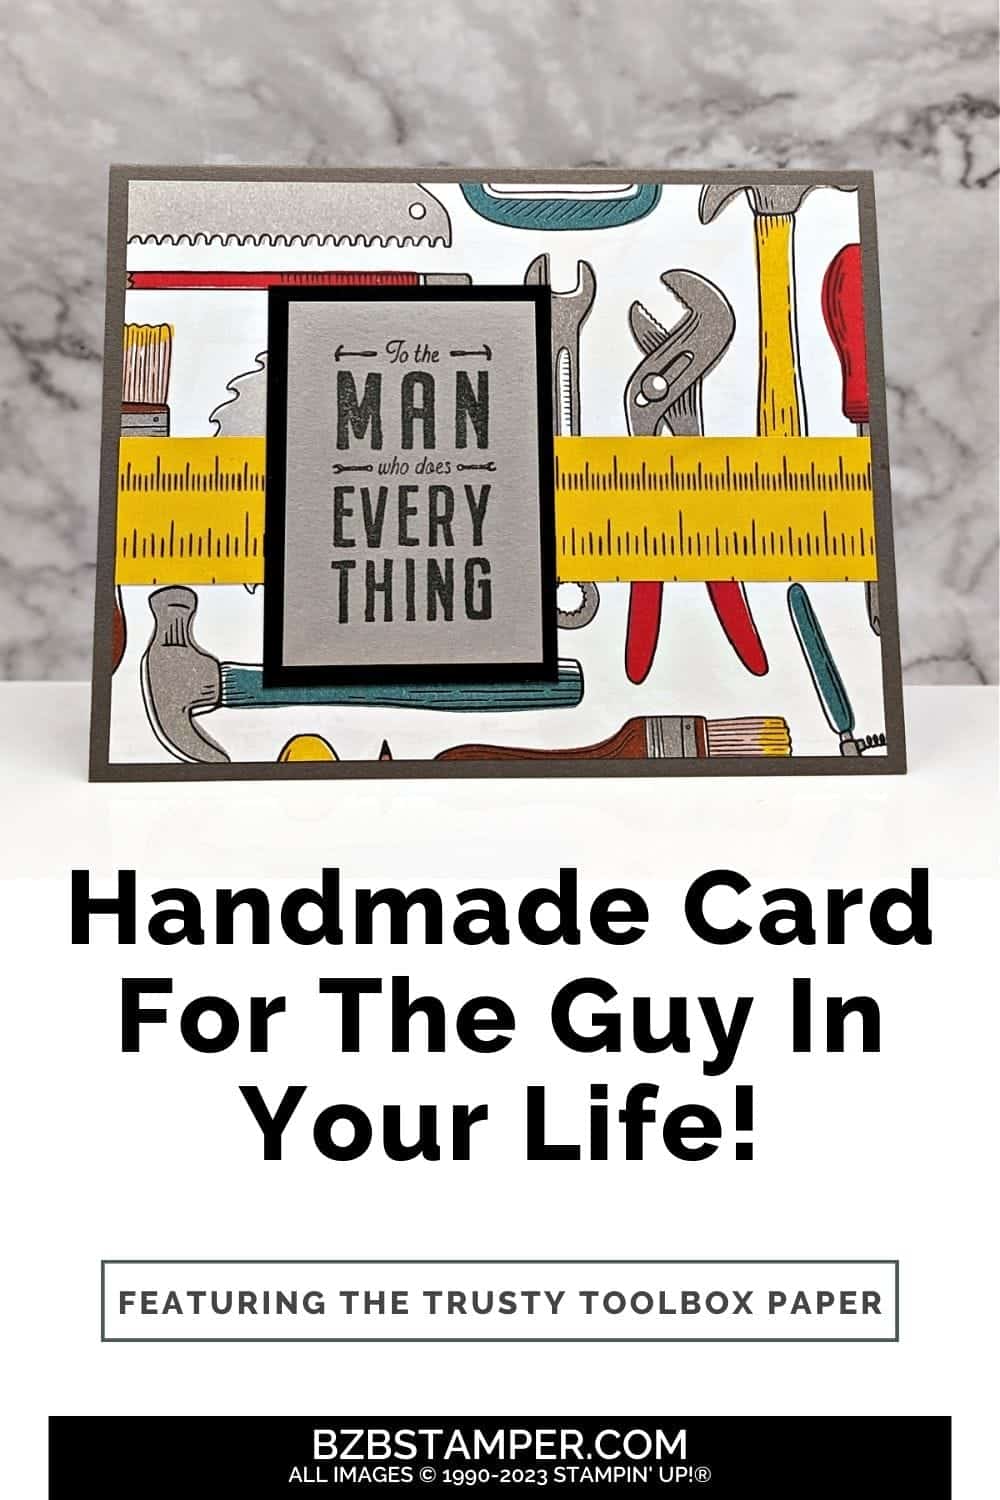 Handmade Card Ideas for Men using the He's All That Stamp Set with paper featuring tools and a tape measure.
